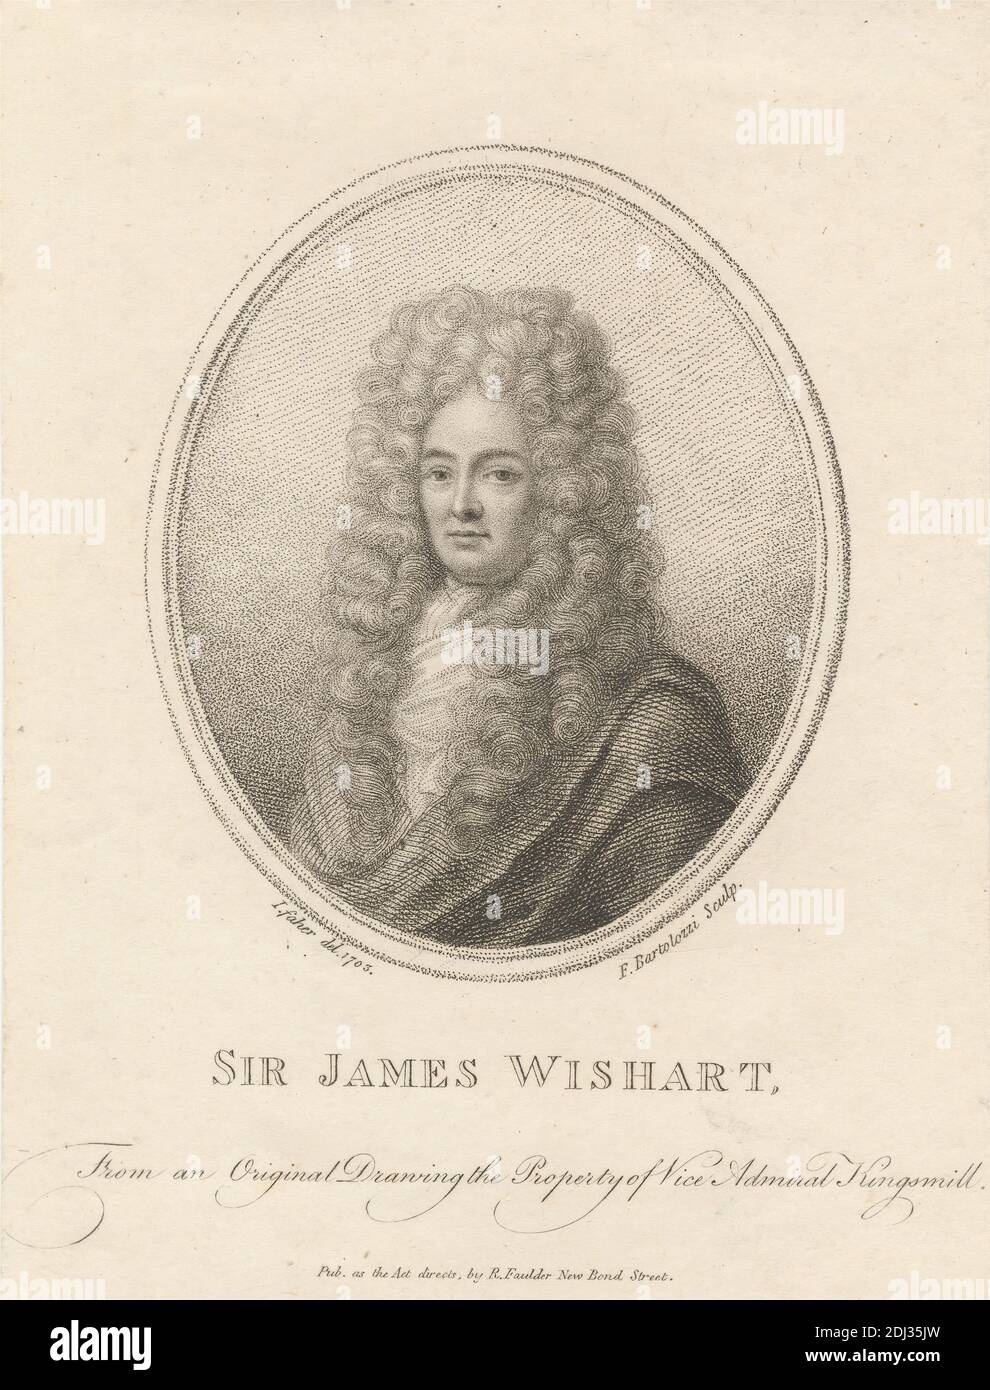 Sir James Wishart, Print made by Francesco Bartolozzi RA, 1728–1815, Italian, active in Britain (1764–99), after John Faber the Younger, ca. 1695–1756, Netherlandish, active in Britain, Published by Faulder & Son, active 1799–1810, British, between 1794 and 1798, Stipple engraving and etching on medium, smooth, cream wove paper, Sheet: 5 1/2 x 3 3/4 inches (13.9 x 9.5 cm) and Image: 3 1/8 x 2 5/8 inches (7.9 x 6.6 cm), admiral, captain, knights, man, navy, oval, portrait, stock, wig, Wove Stock Photo